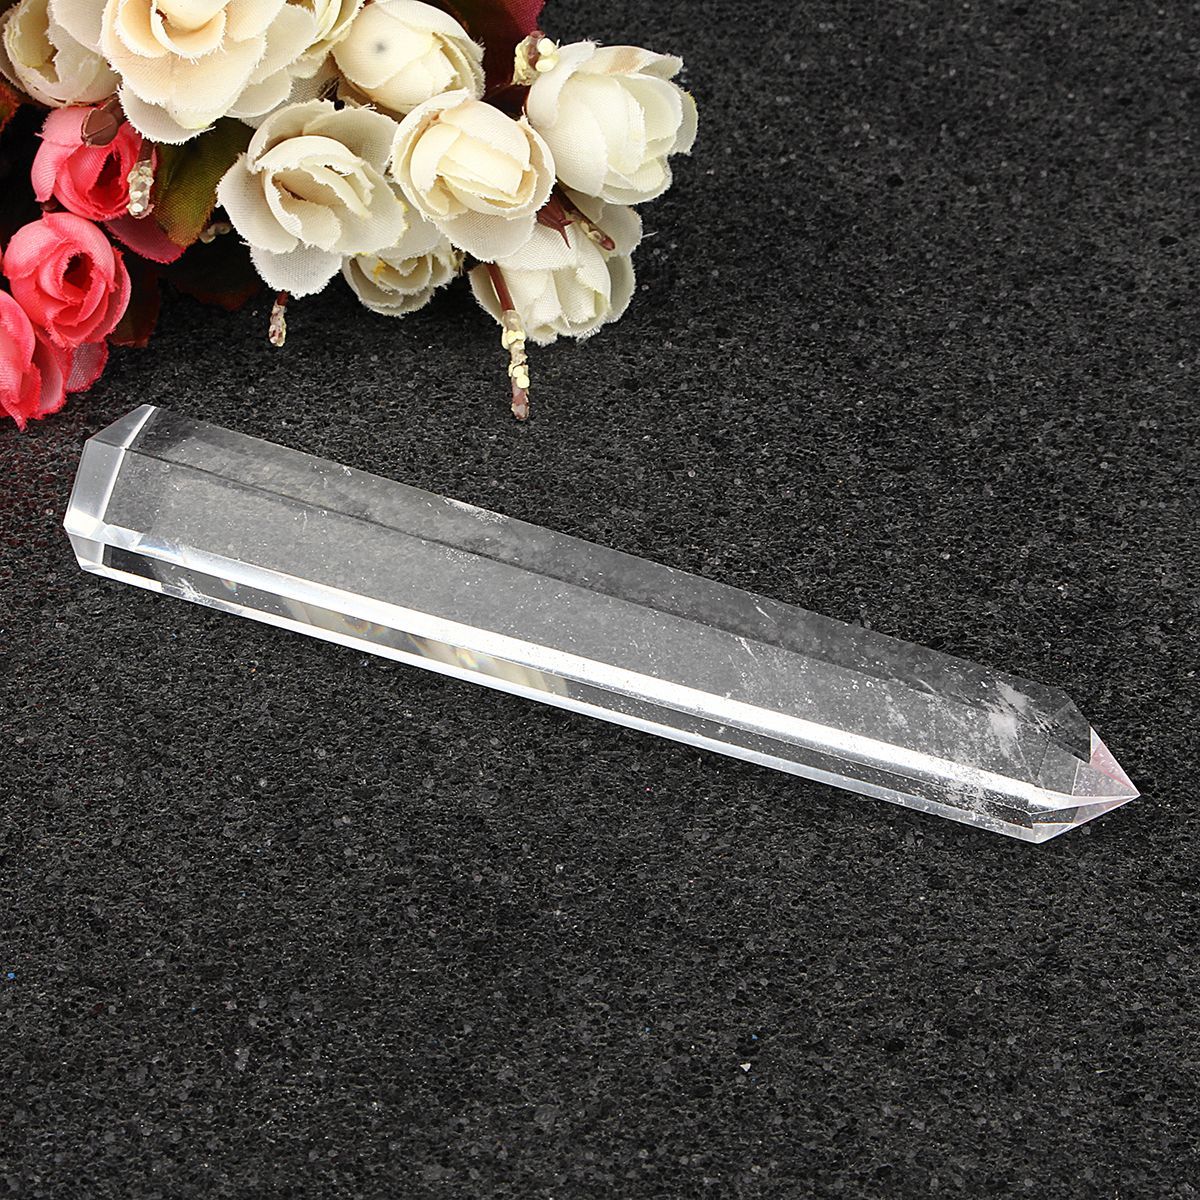 50g-100-Natural-Clear-Quartz-Crystal-Point-Specimen-Healing-Rock-Stone-150mm-Home-Decorations-Gift-1402433